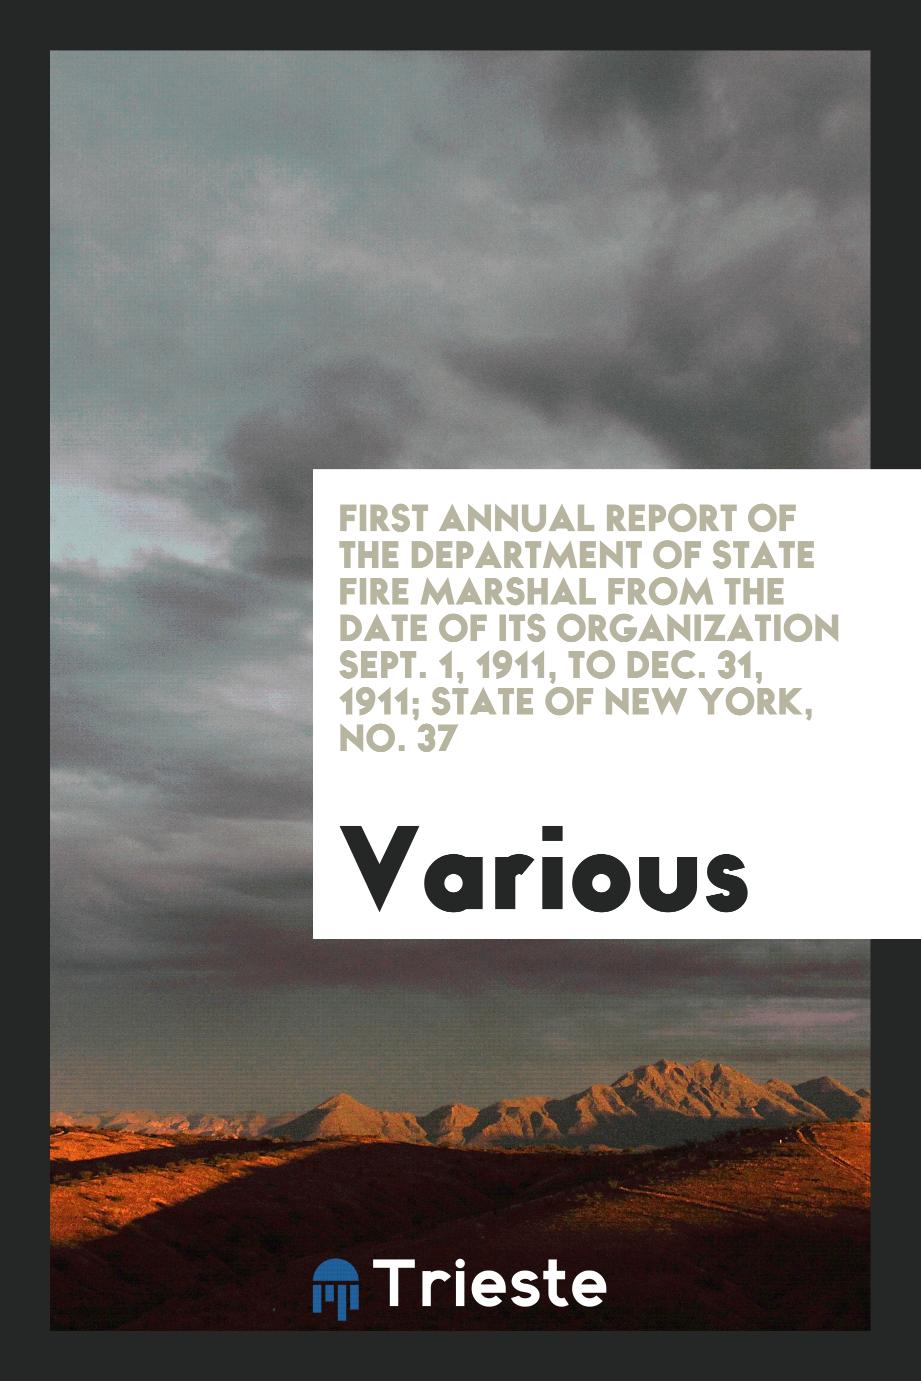 First Annual Report of the Department of State Fire Marshal from the date of its Organization Sept. 1, 1911, to Dec. 31, 1911; State of New York, No. 37